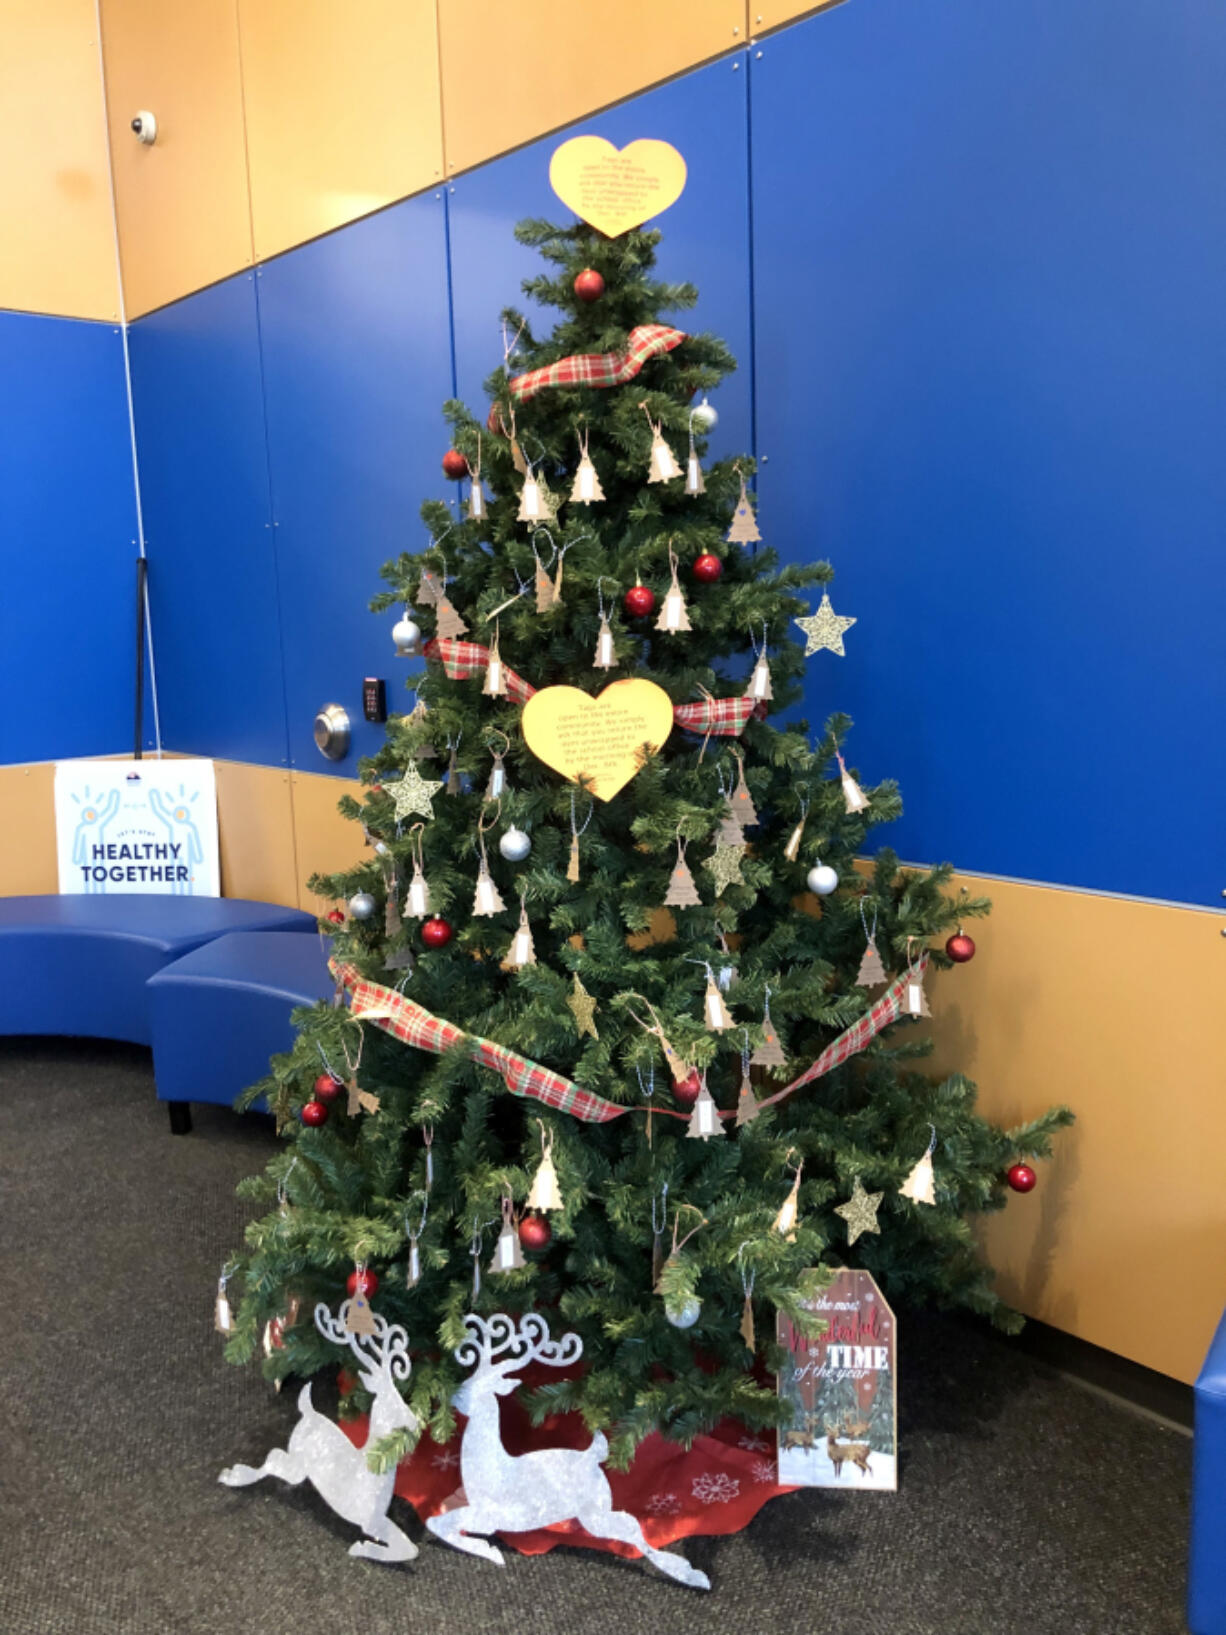 The Giving Tree is a holiday tradition in Ridgefield schools, providing gifts for local families in need.